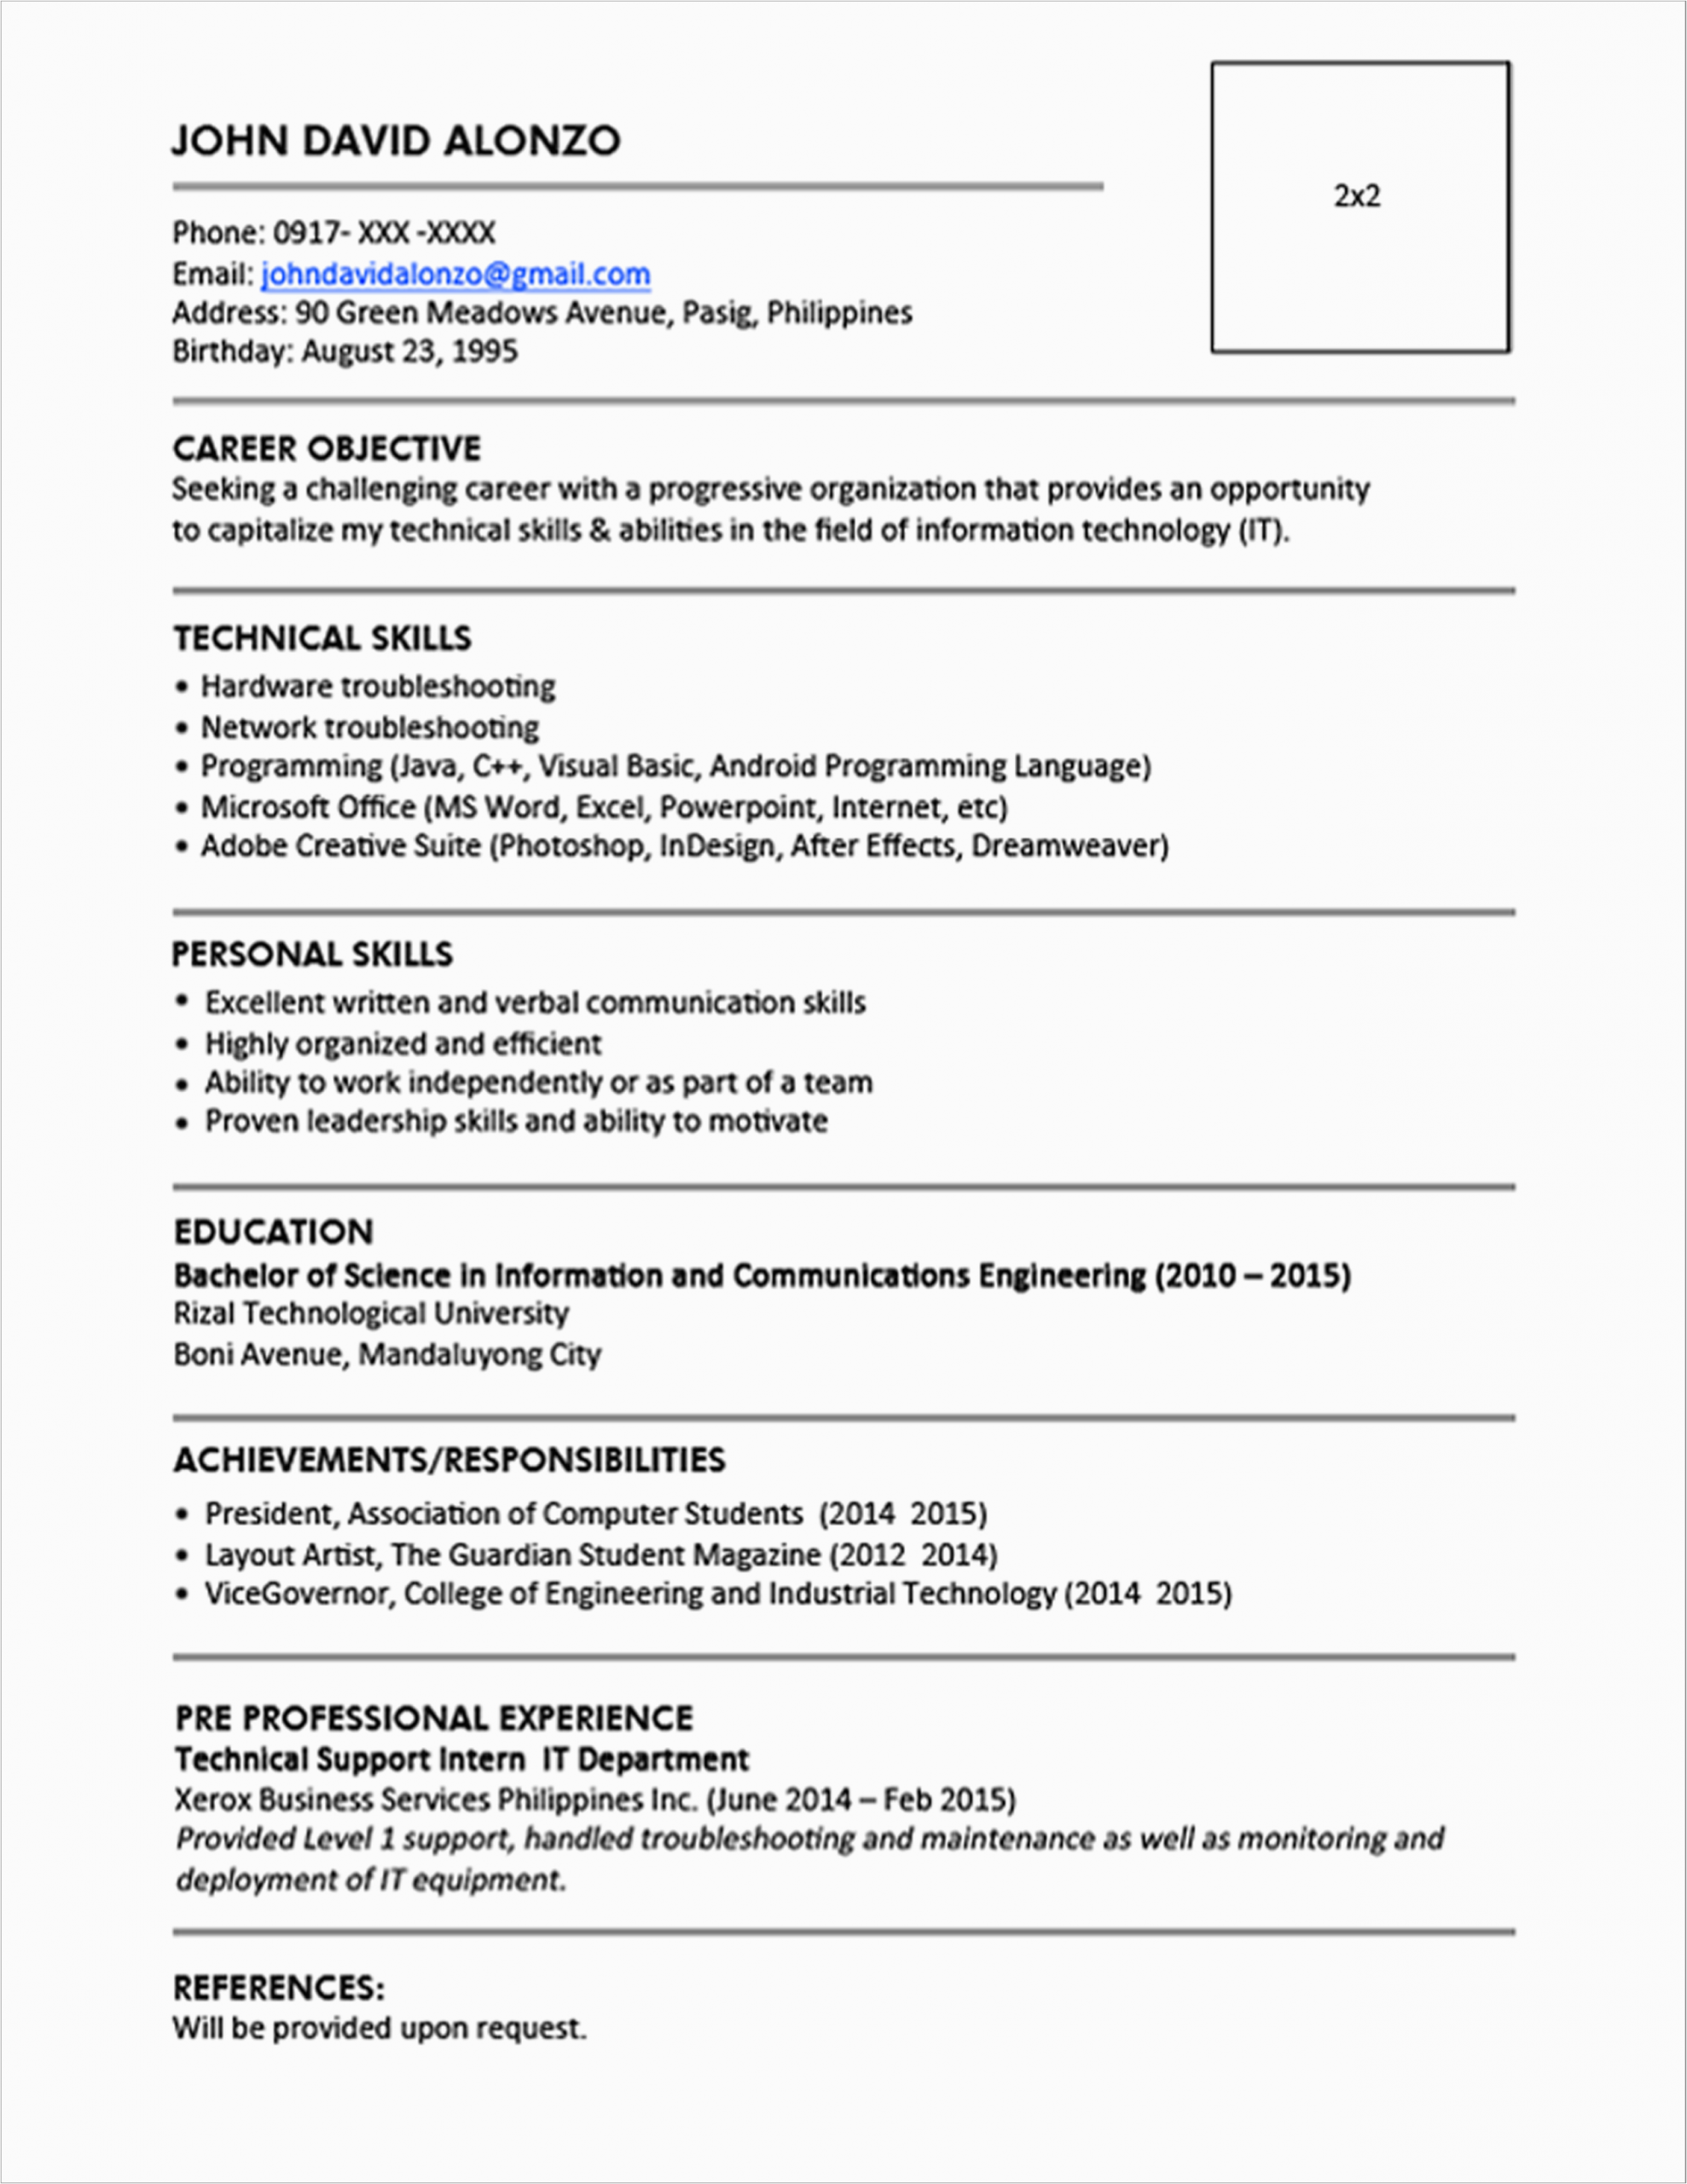 Sample Of Simple Resume In Philippines Resume Templates You Can